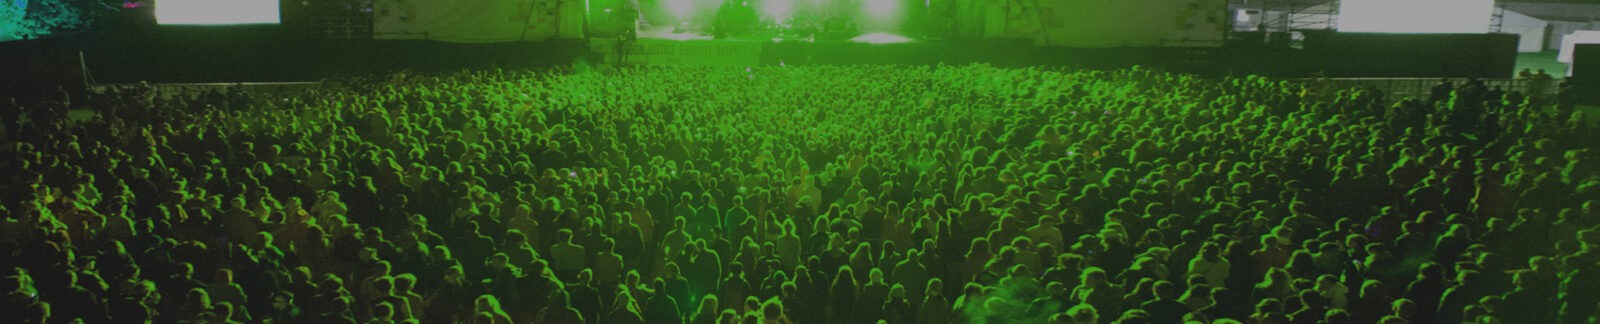 festival crowd looking at stage green lights